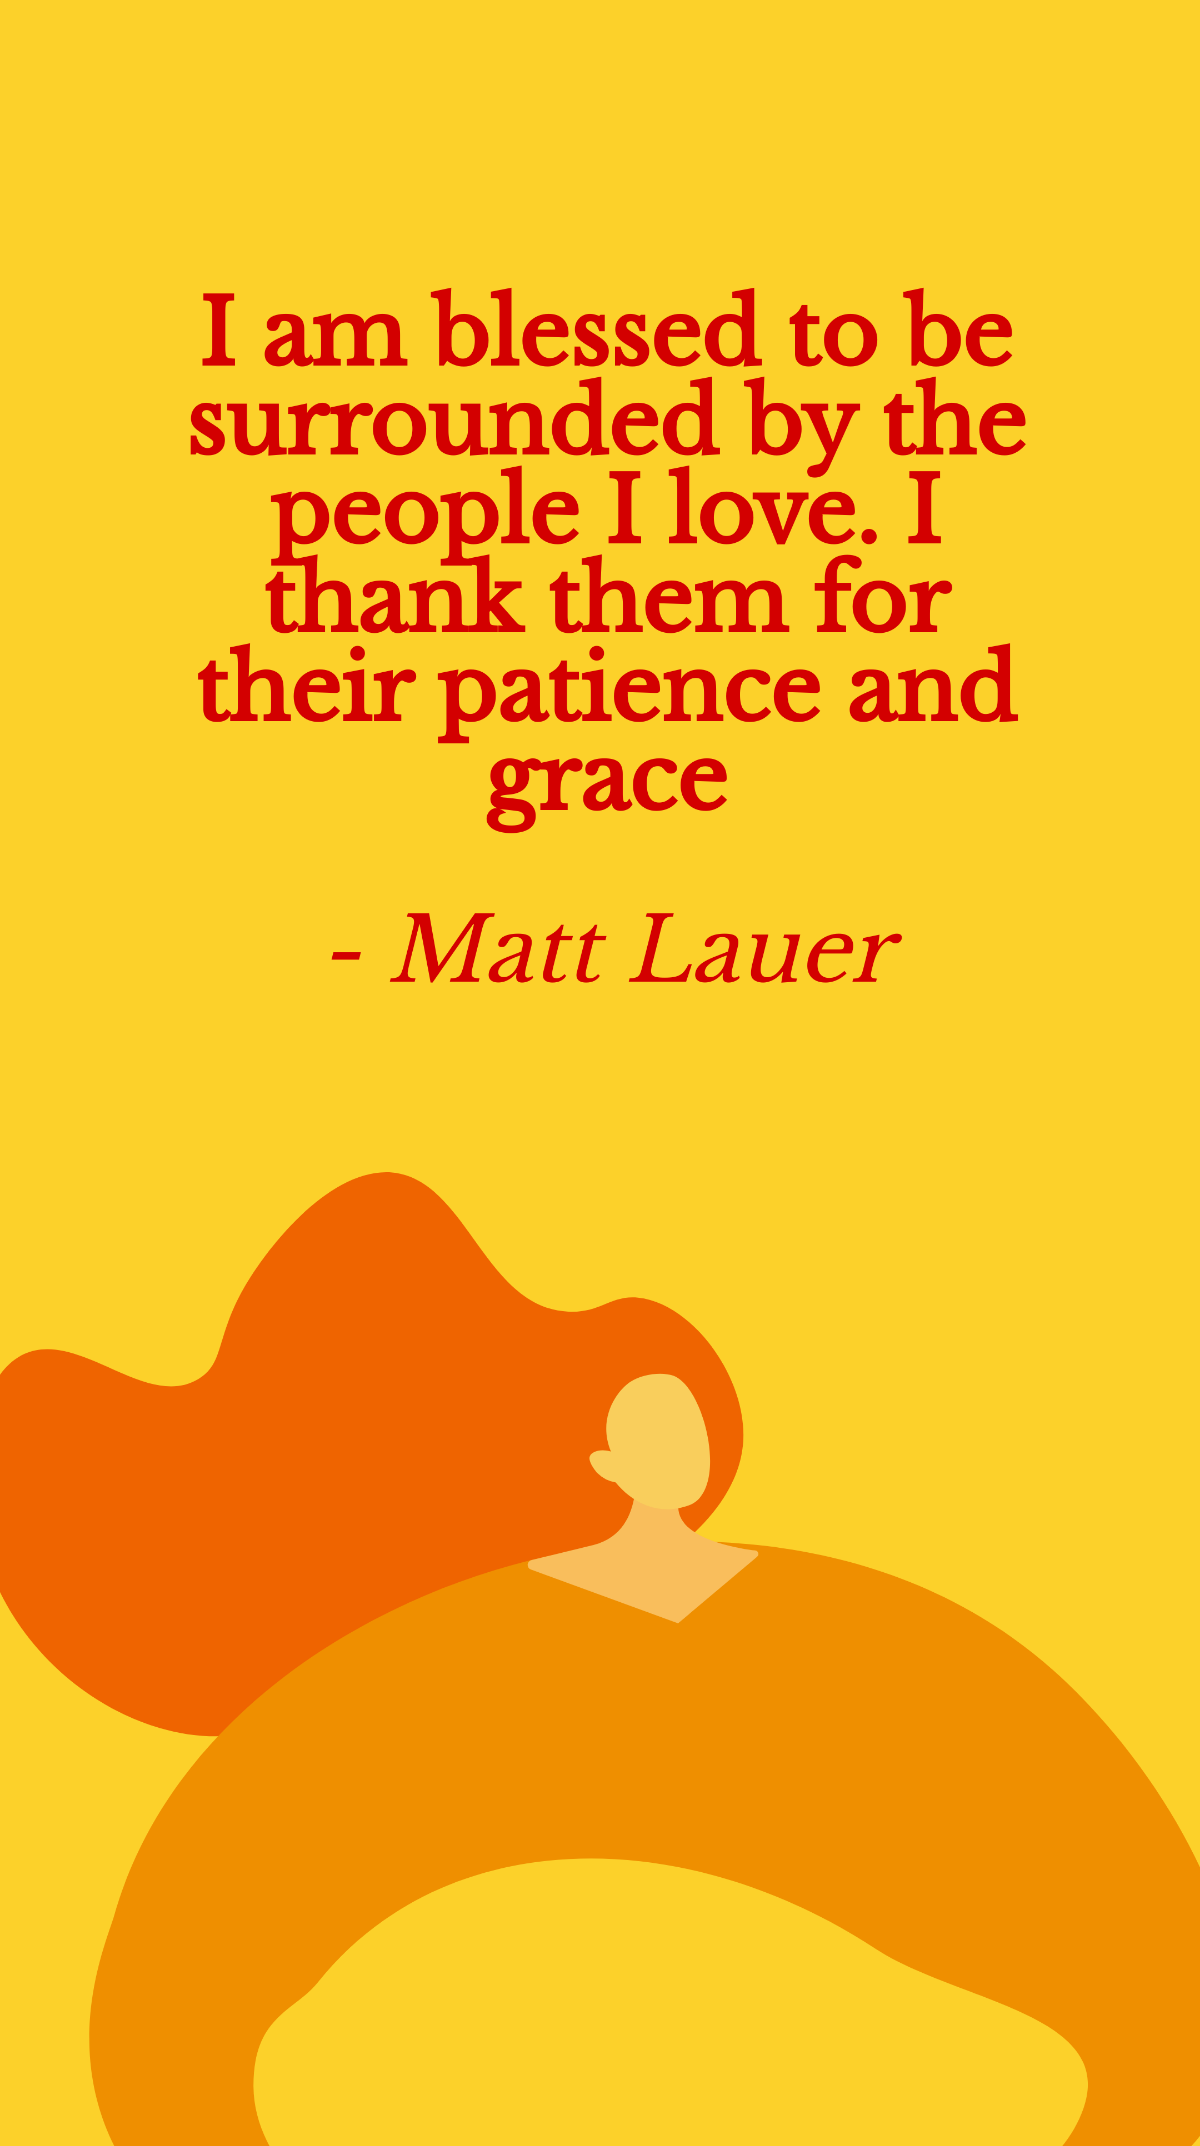 Matt Lauer - I am blessed to be surrounded by the people I love. I thank them for their patience and grace Template